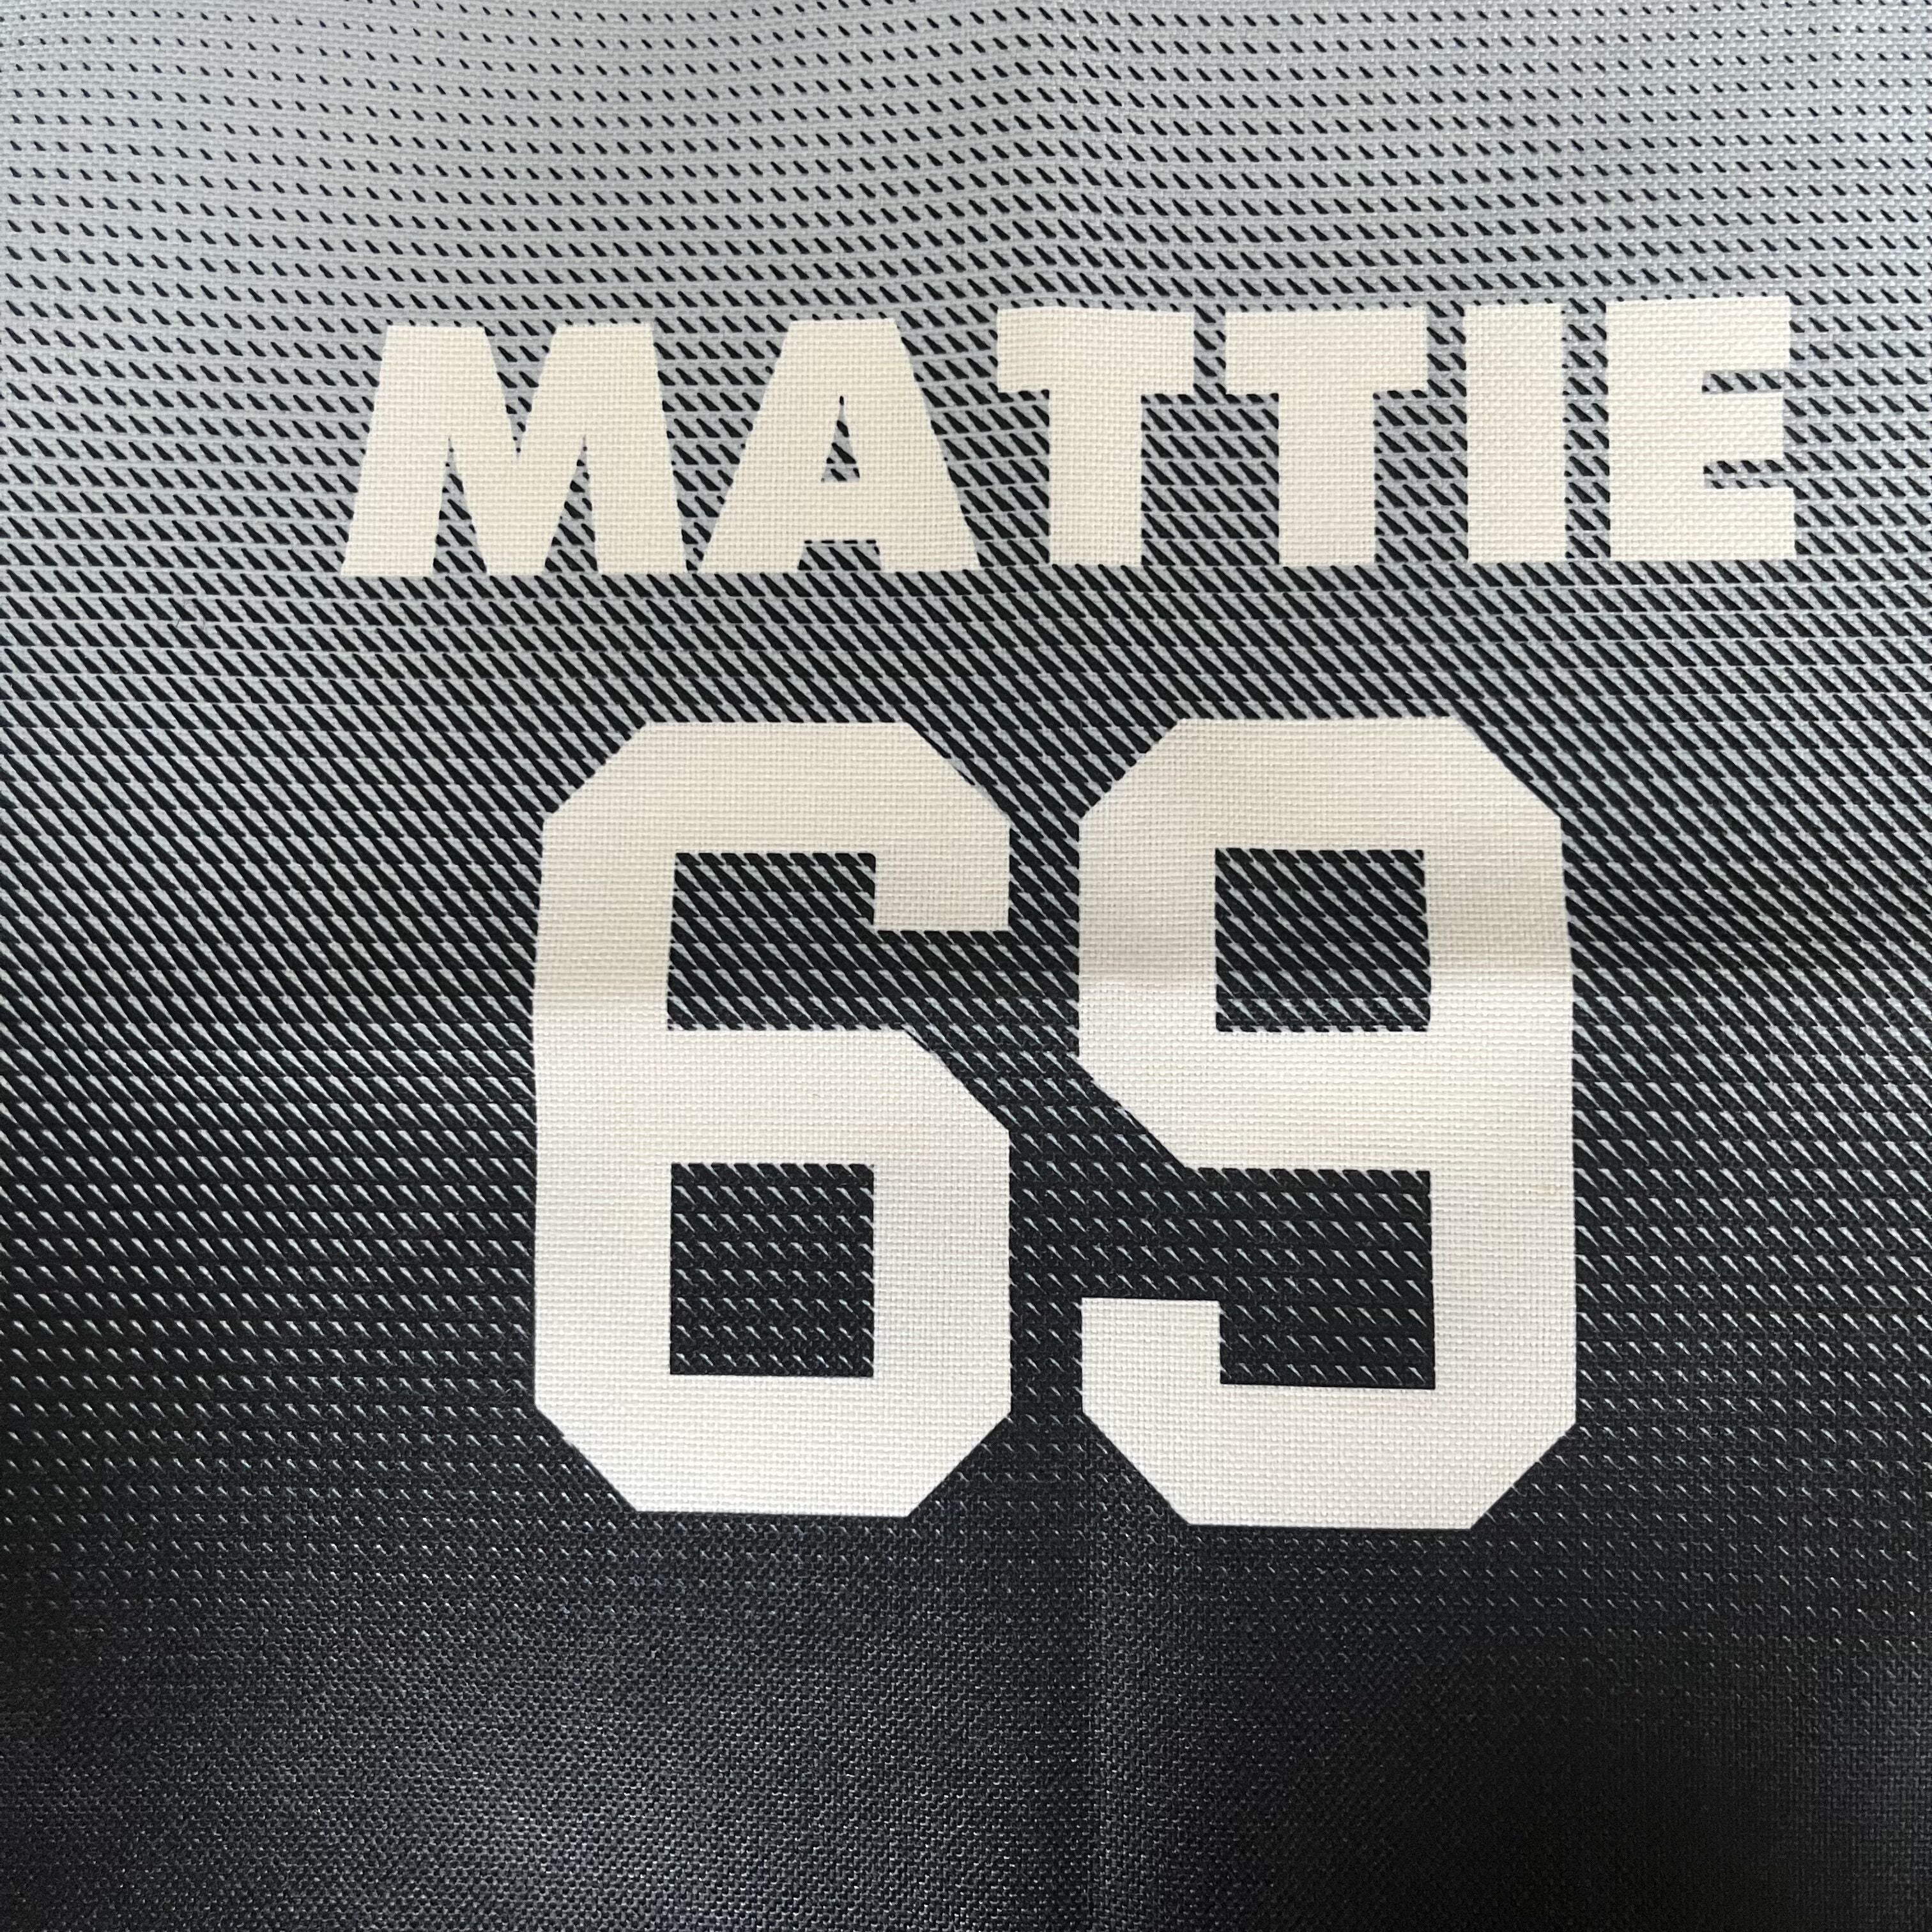 Custom Football Throw Pillow for Men Women Boy Gift Printed Your Personalized Name Number Blue&Gray&White